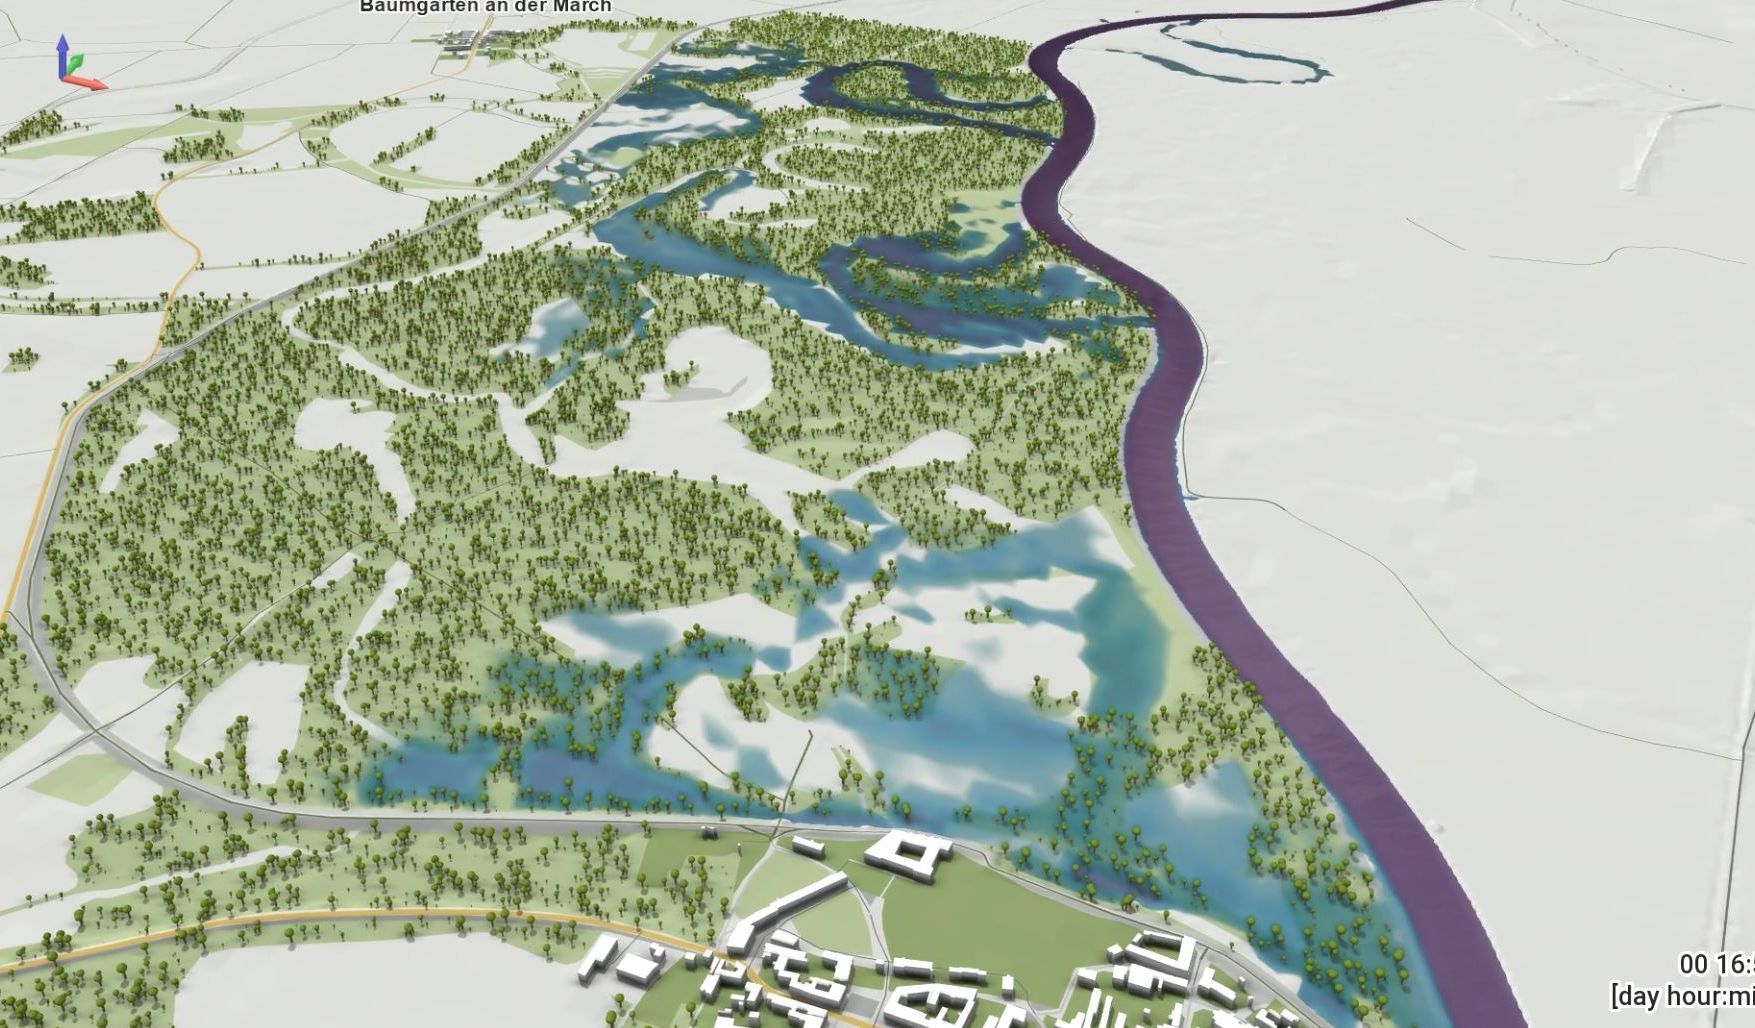 Visualization of the March flood from 2009.